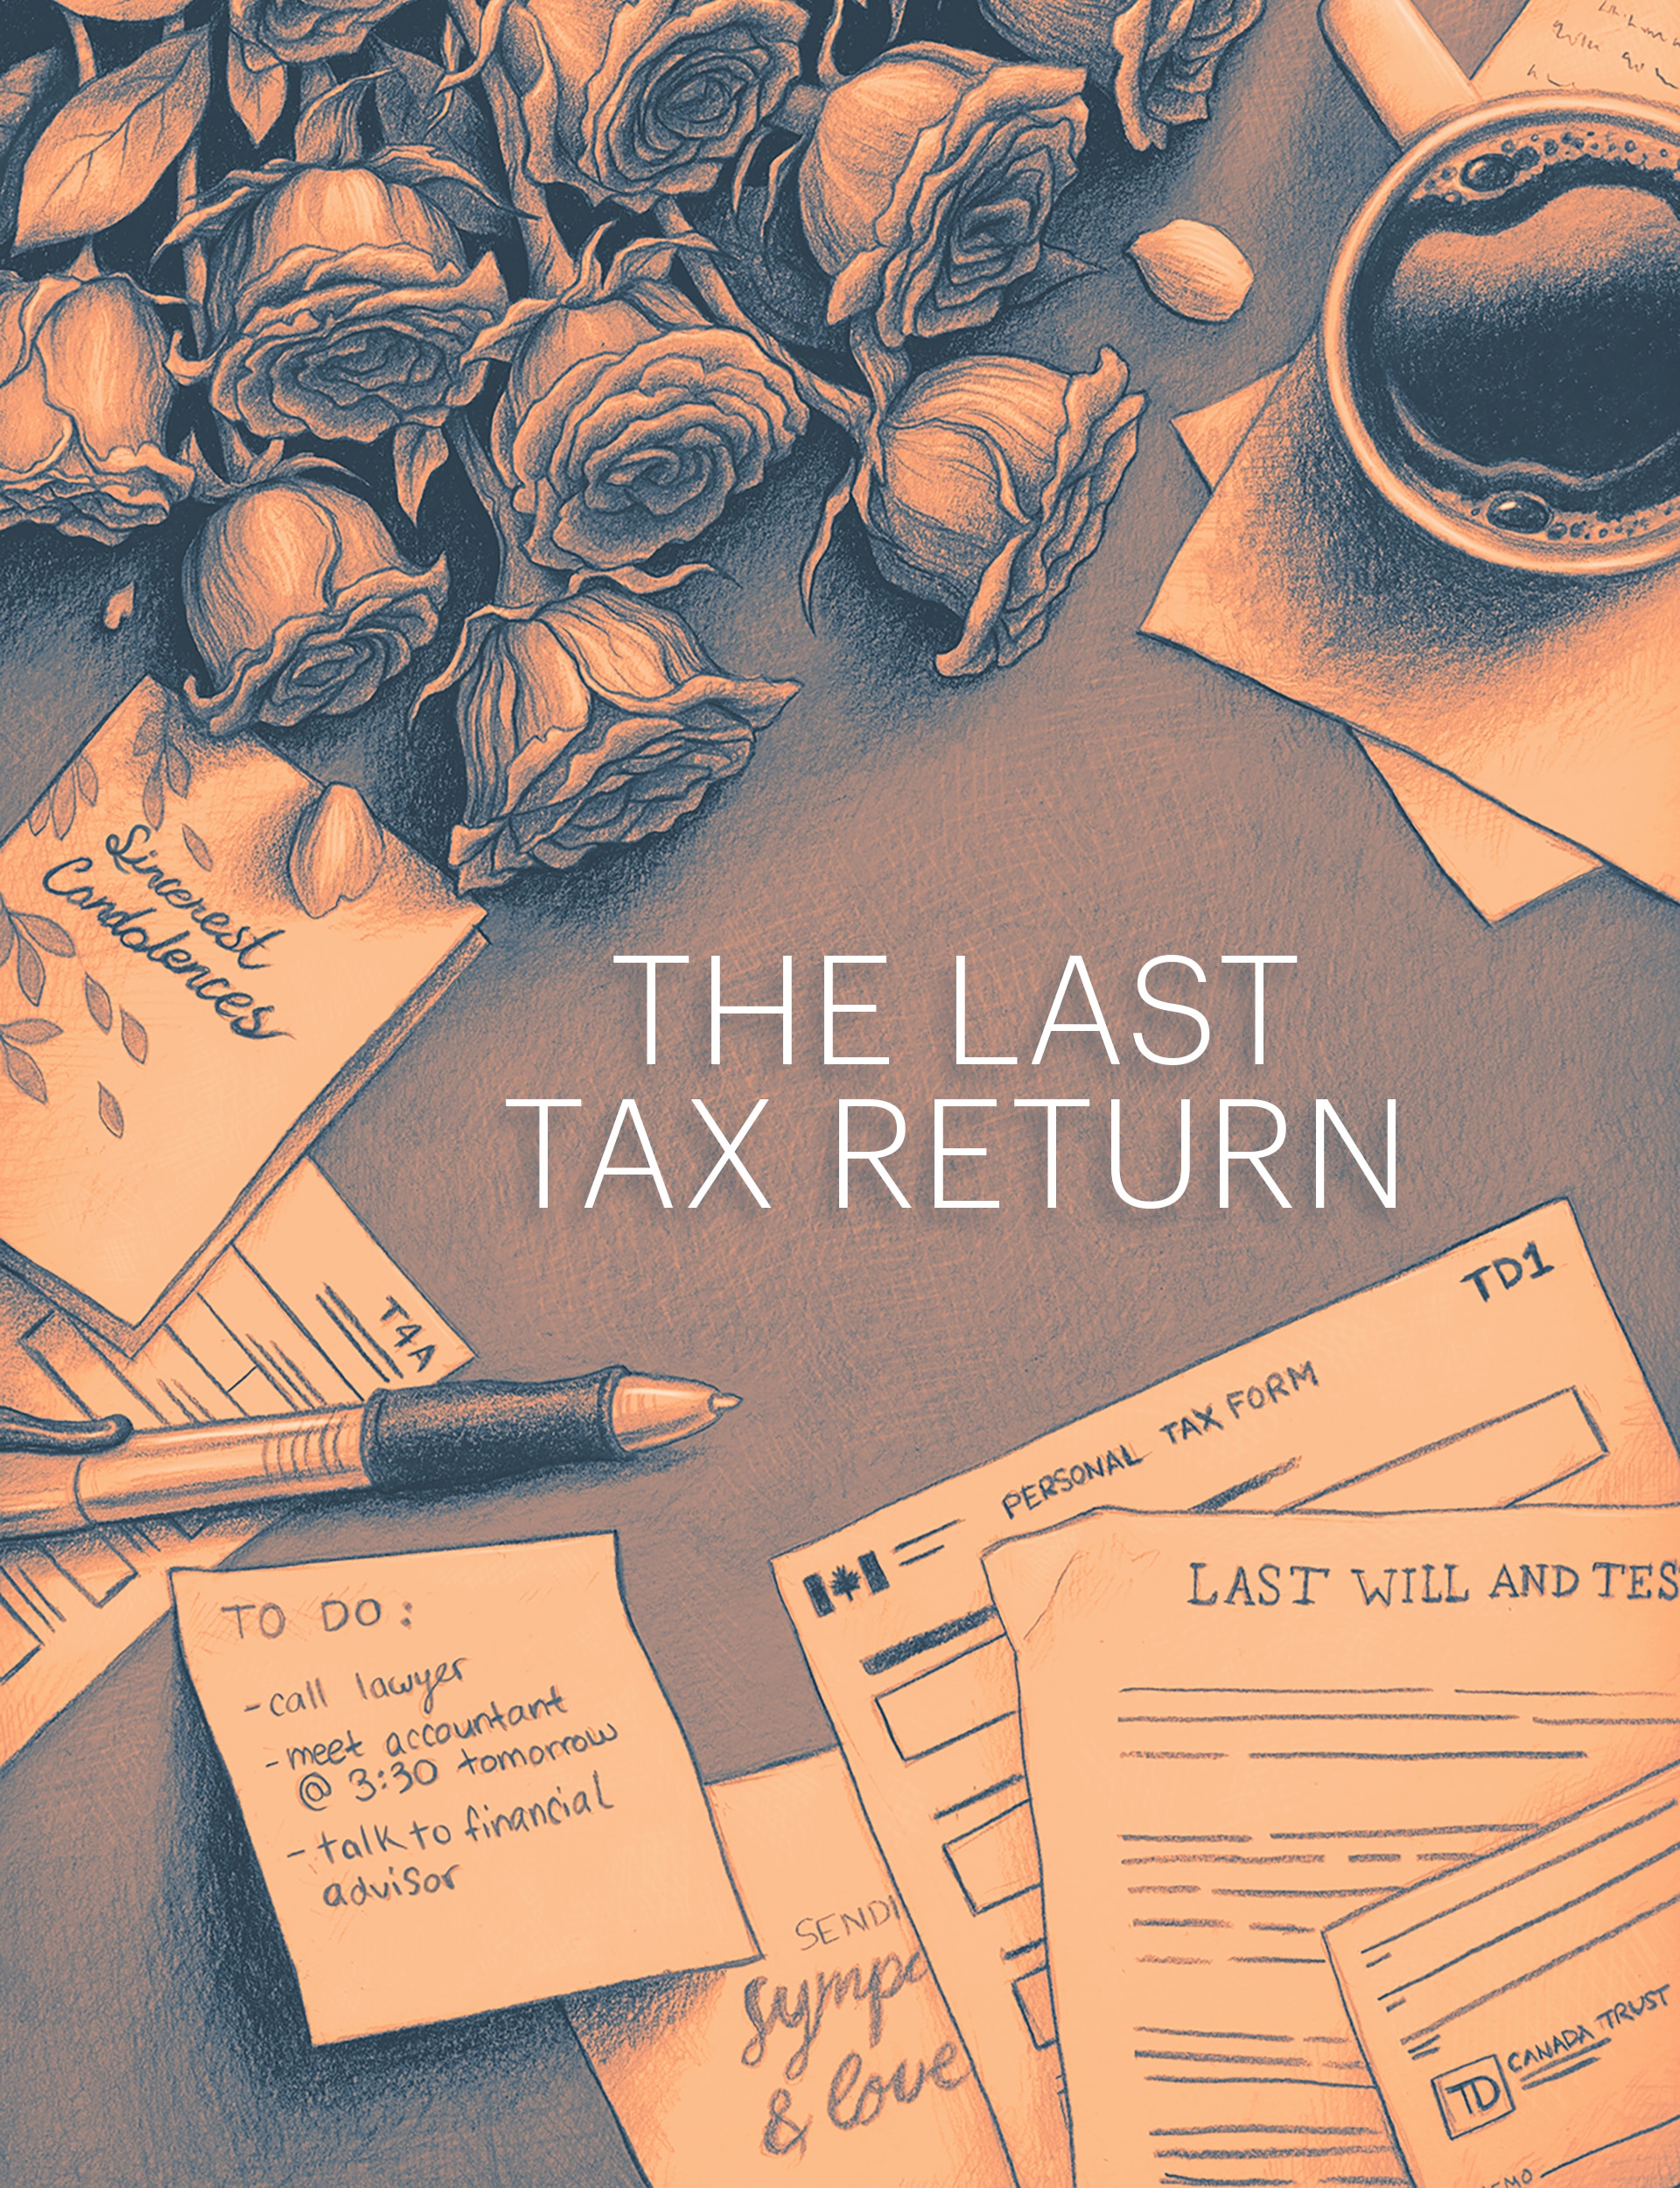 Last Tax Return Archives Moneytalk - the final tax return is a complicated task that may delay the processing of an estate if errors are made or cut off dates are missed